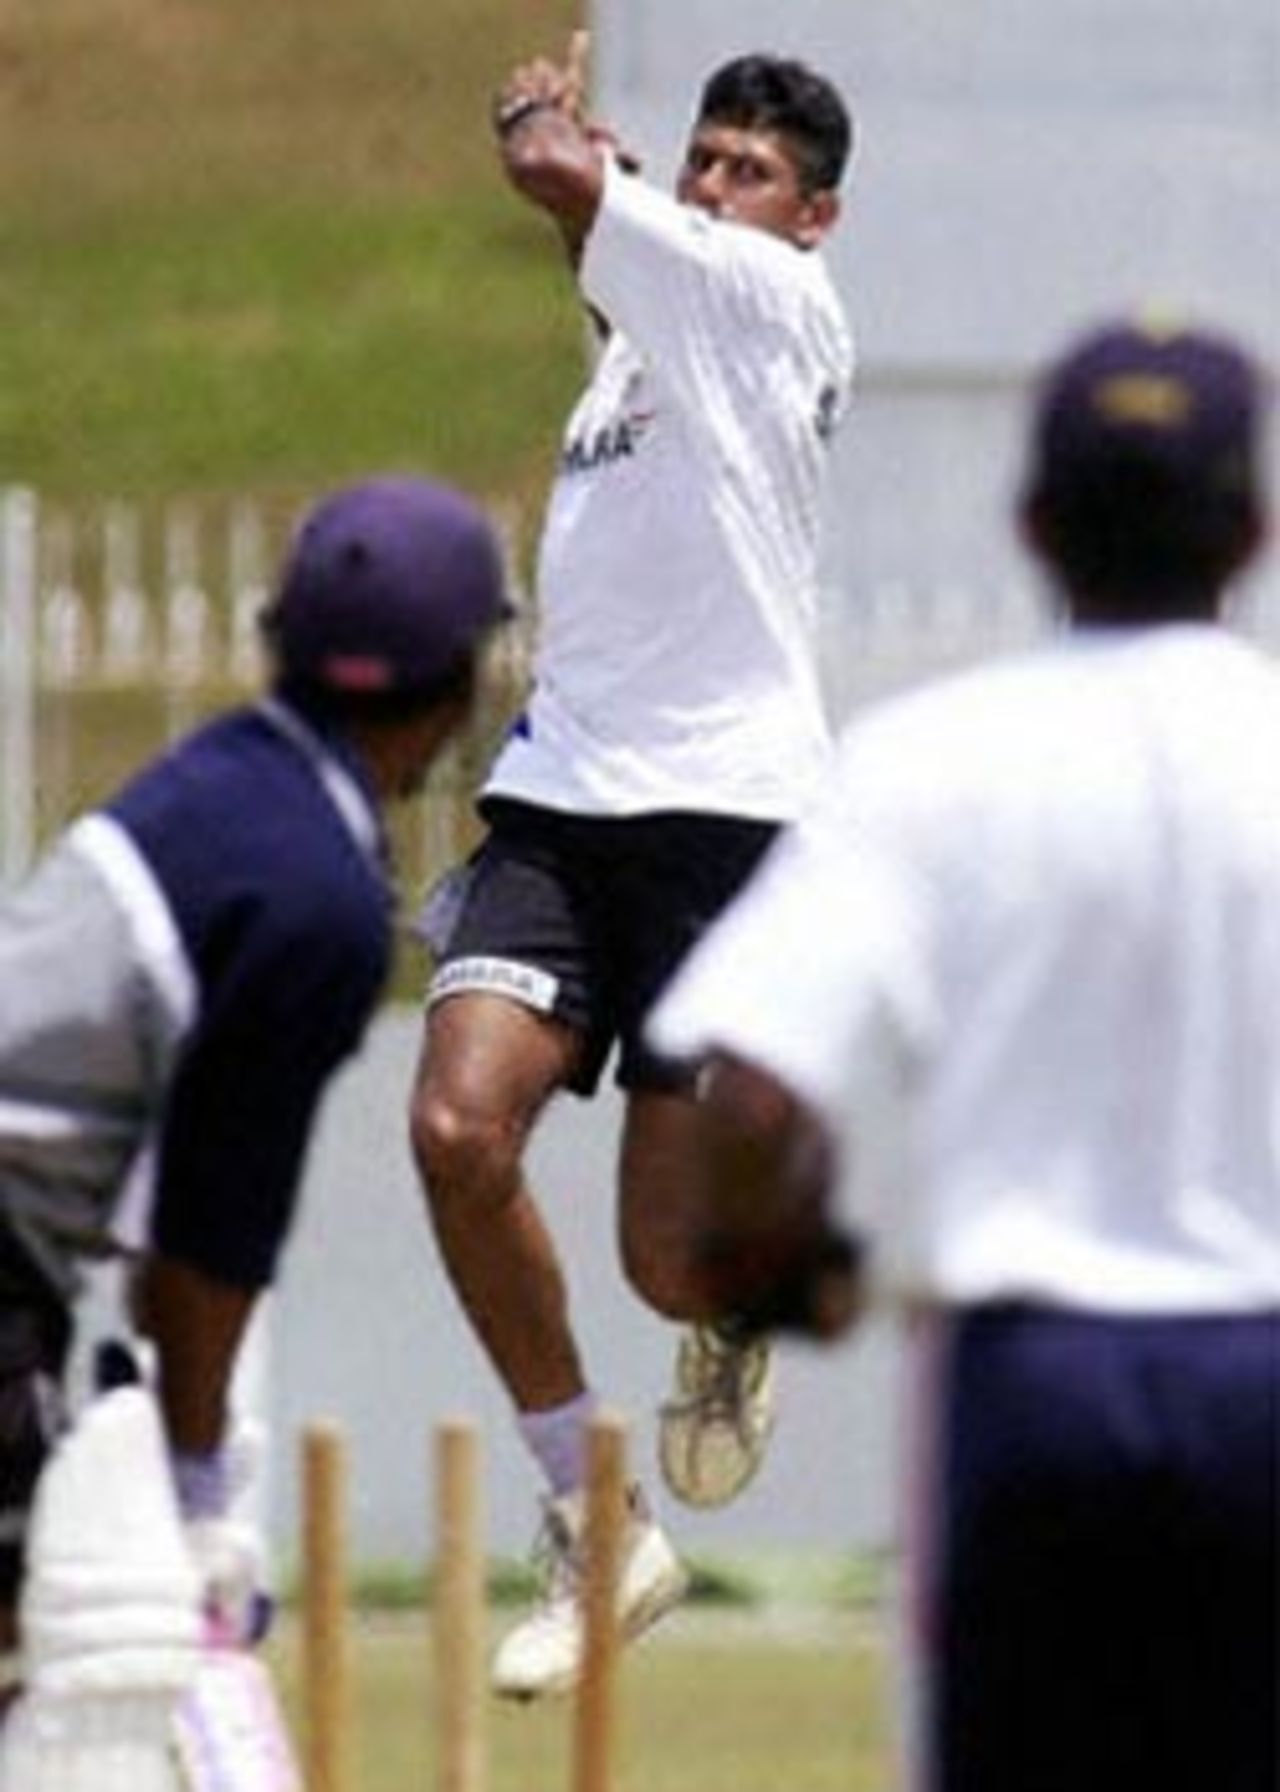 28 August 2001: India in Sri Lanka, Practise Session at the Sinhalese Sports Club Ground in Colombo before the 3rd Test